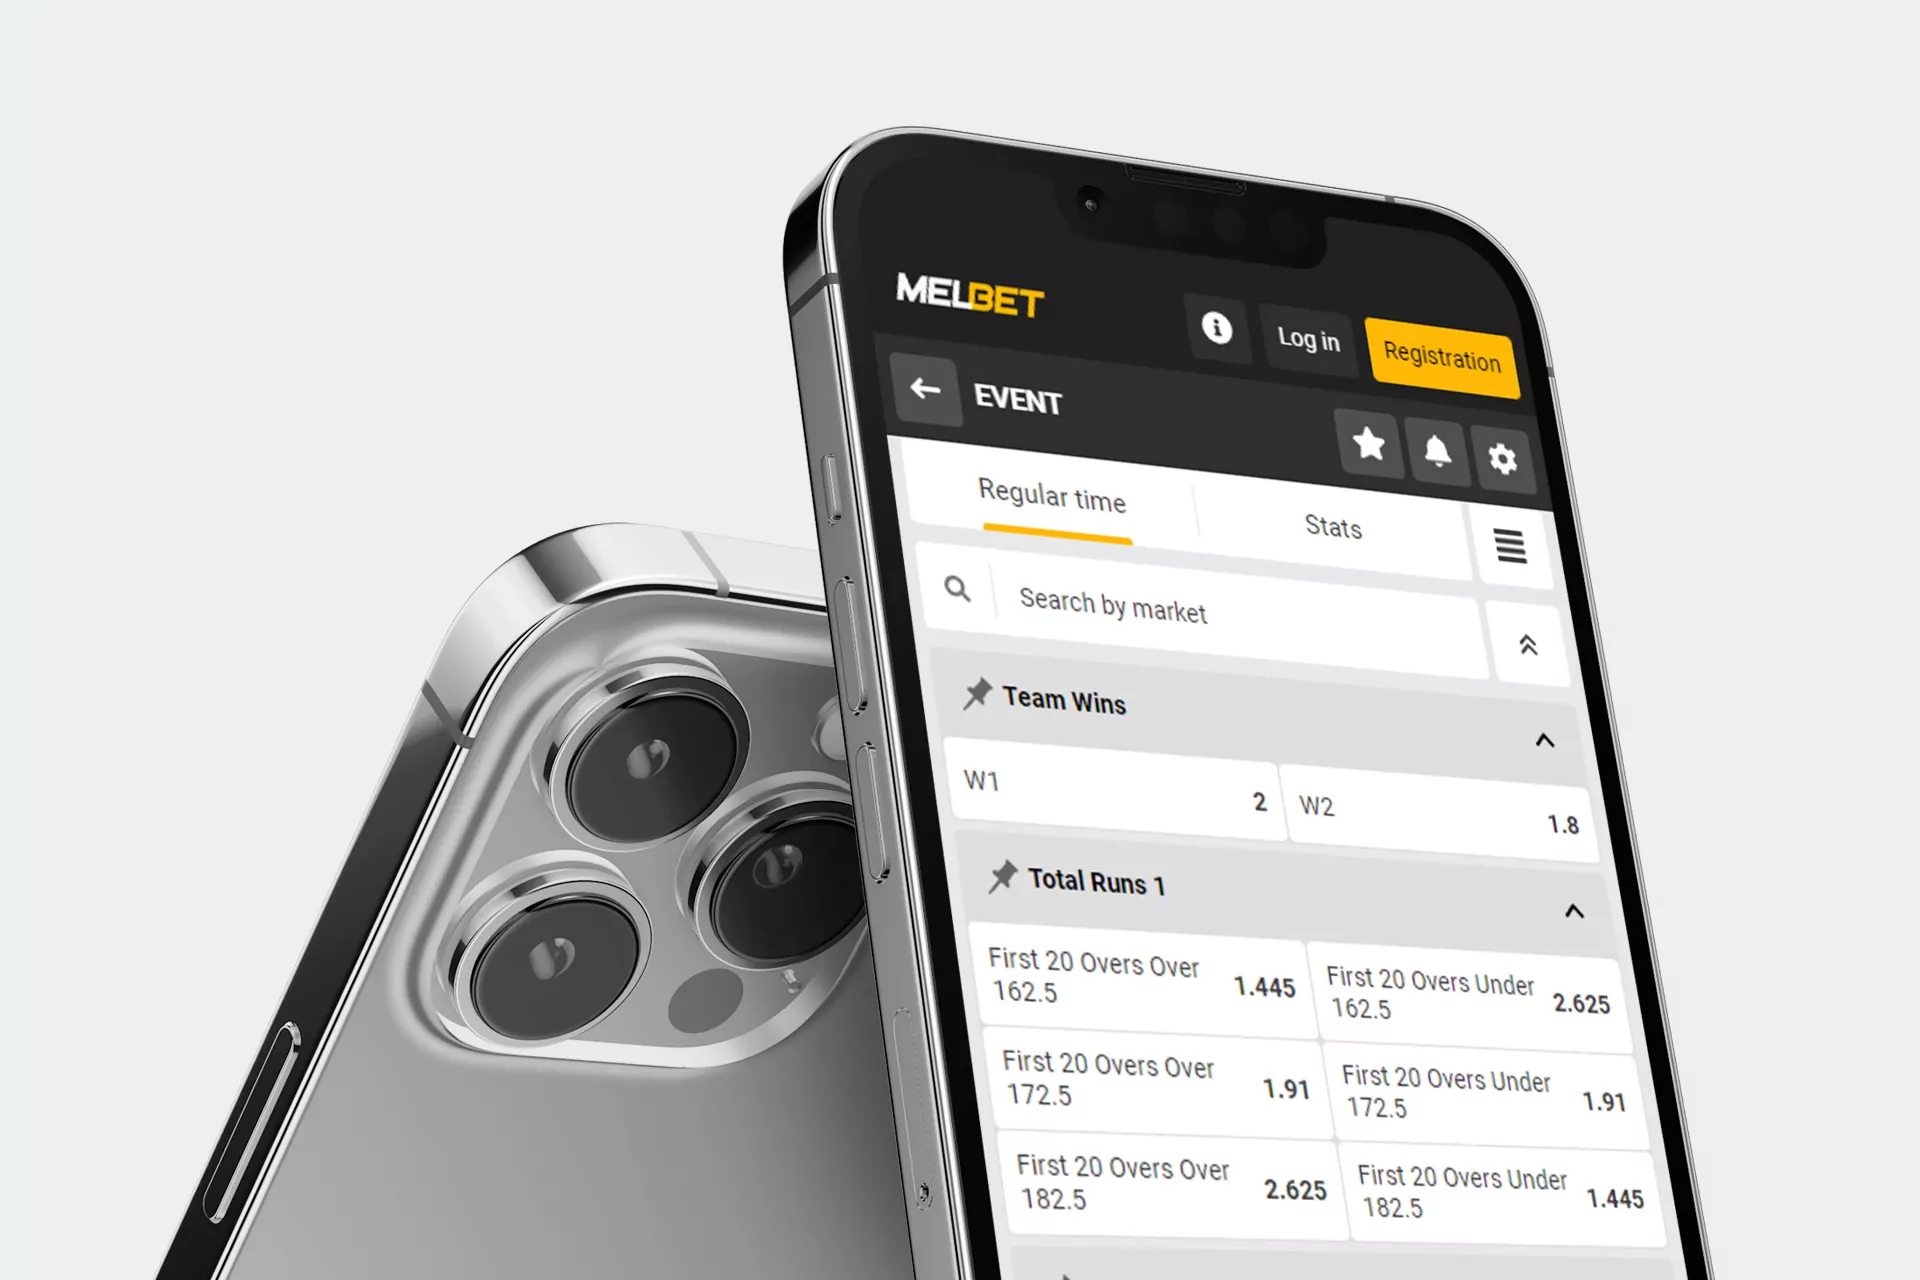 You can use different types of bets in the Melbet app.